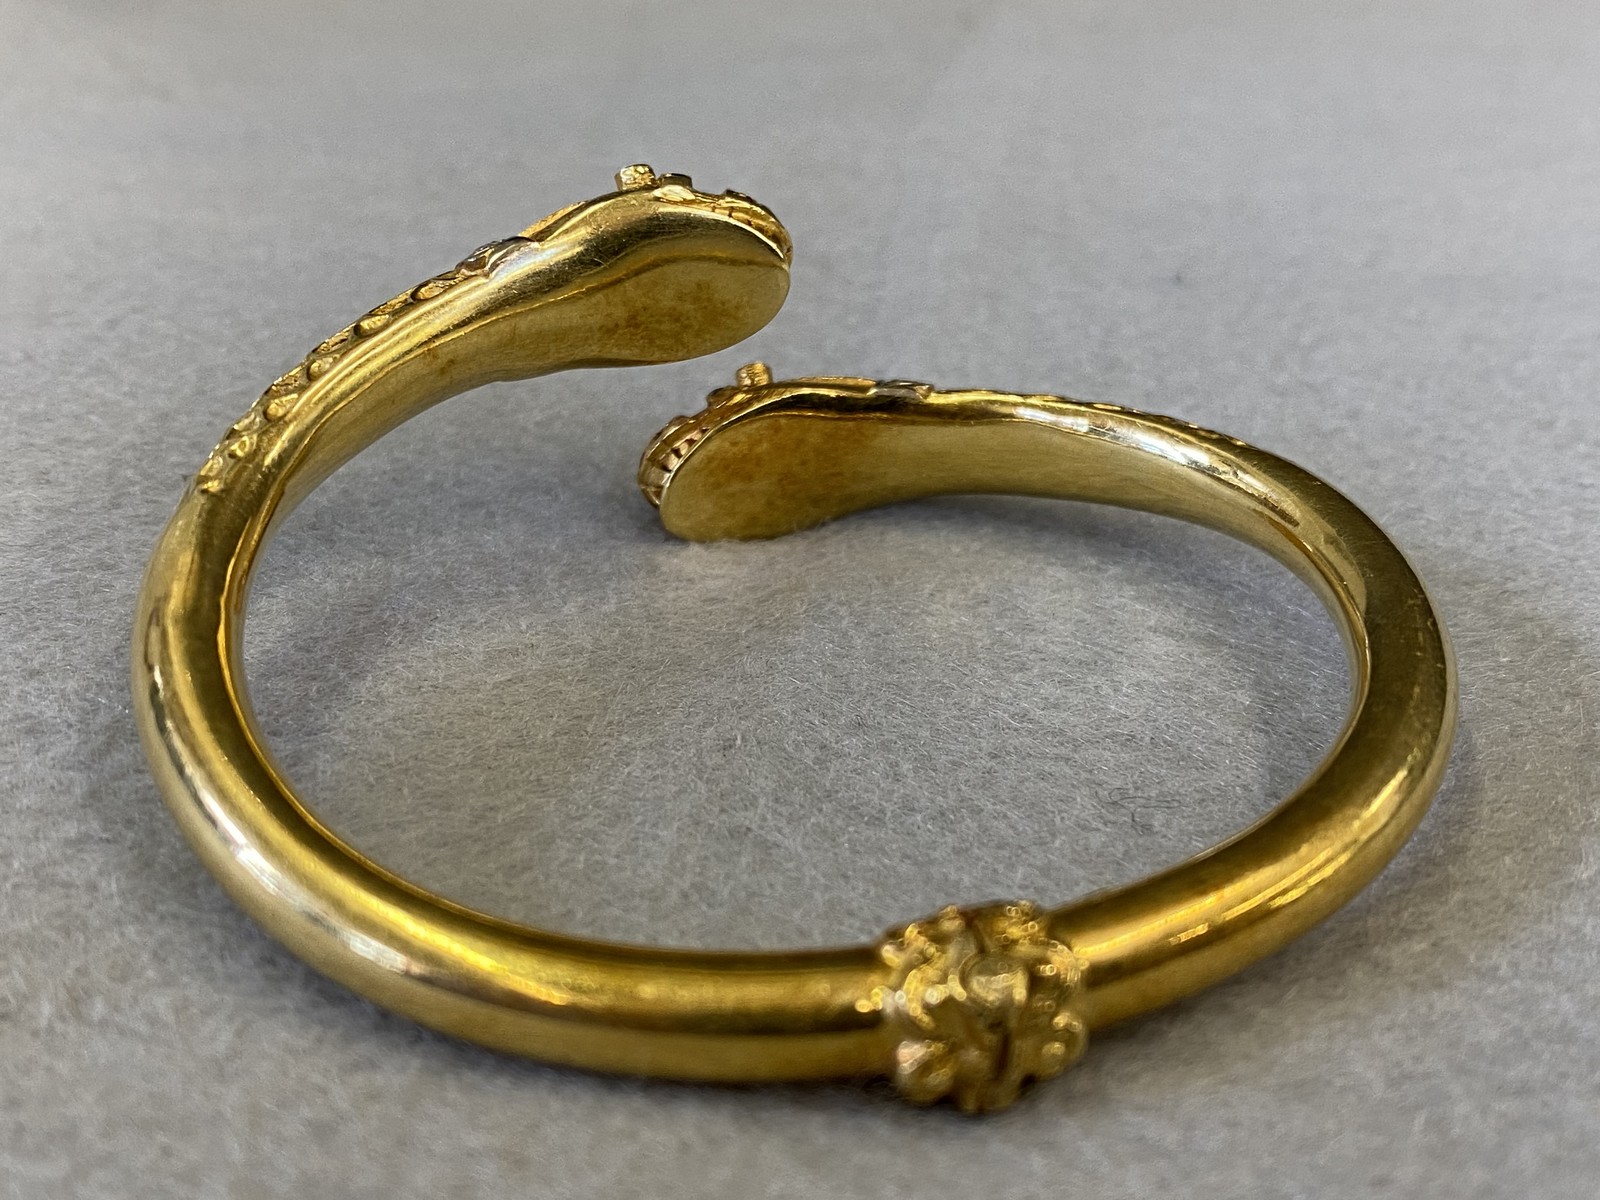 An 18k gold double headed serpent bangle, both heads encrusted with diamonds and semi-precious - Image 2 of 3